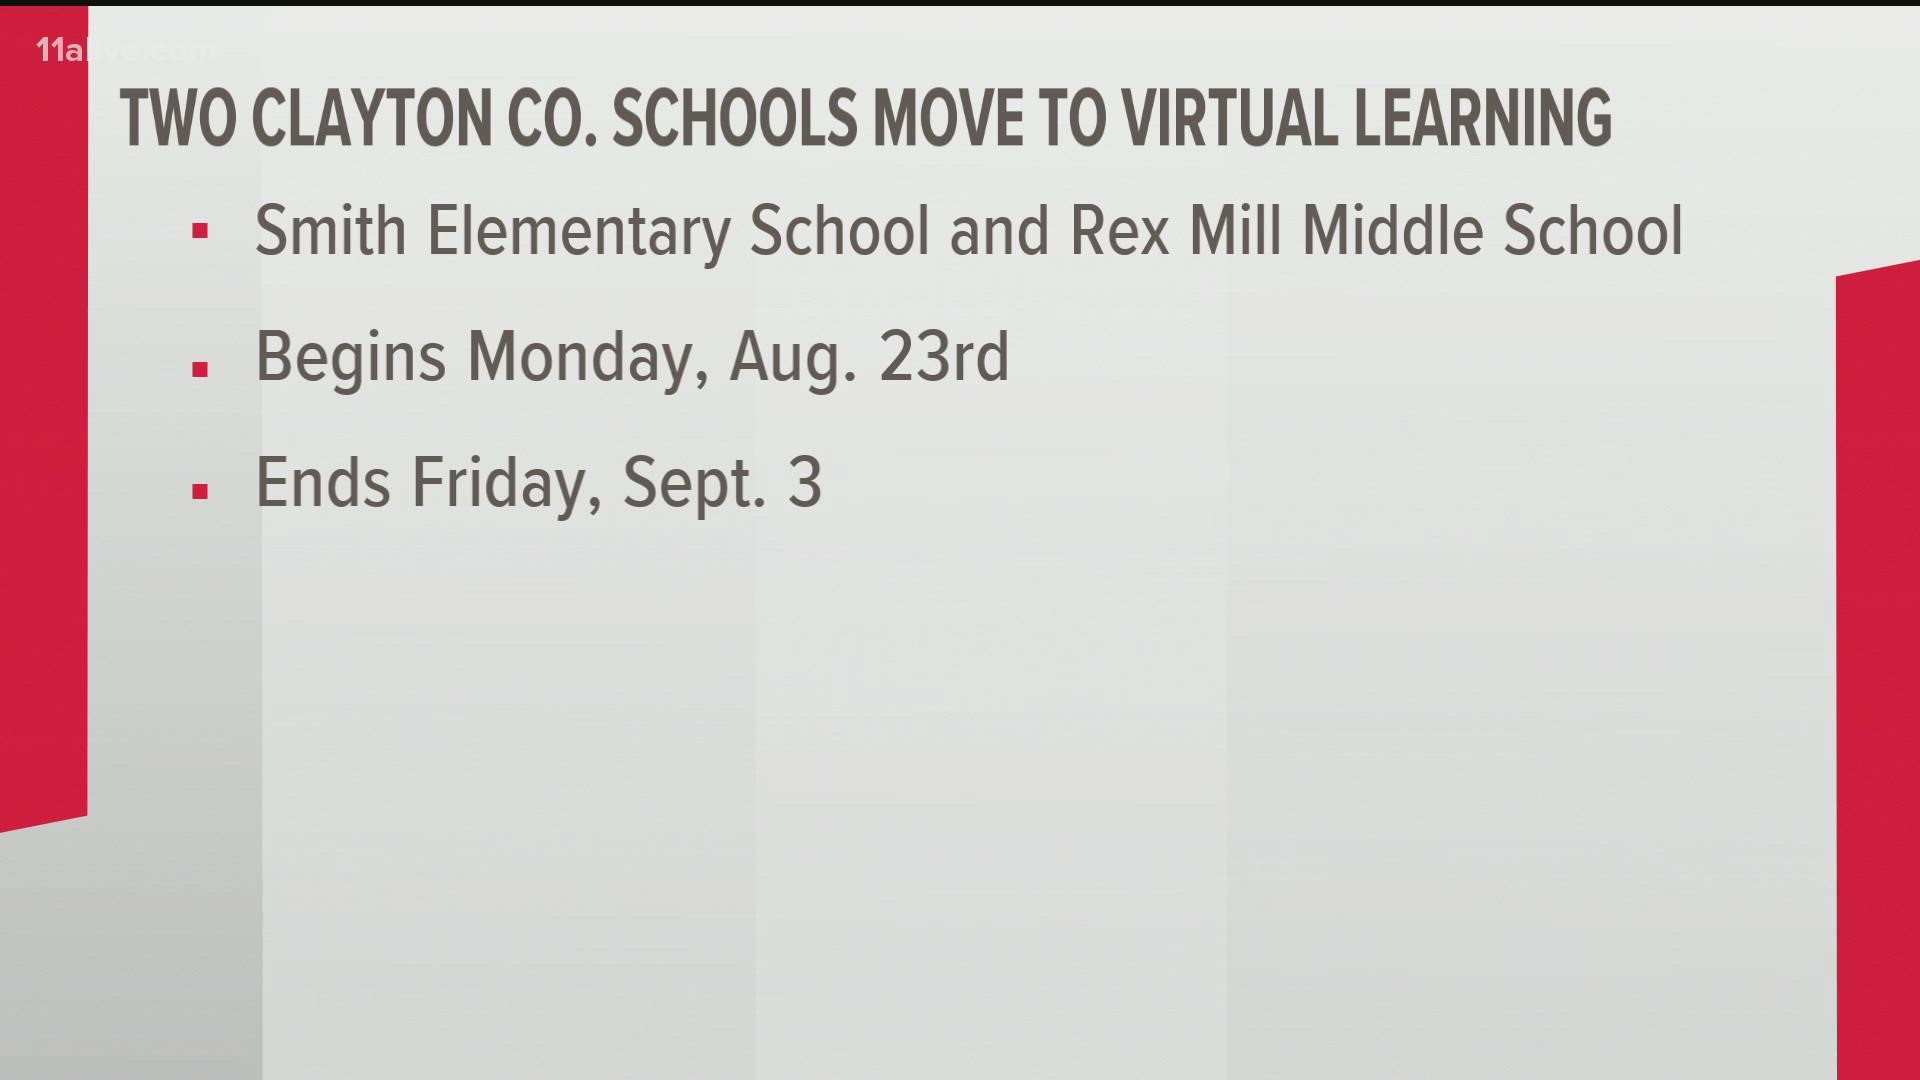 Smith Elementary School and Rex Middle School will be virtual starting Aug. 23.